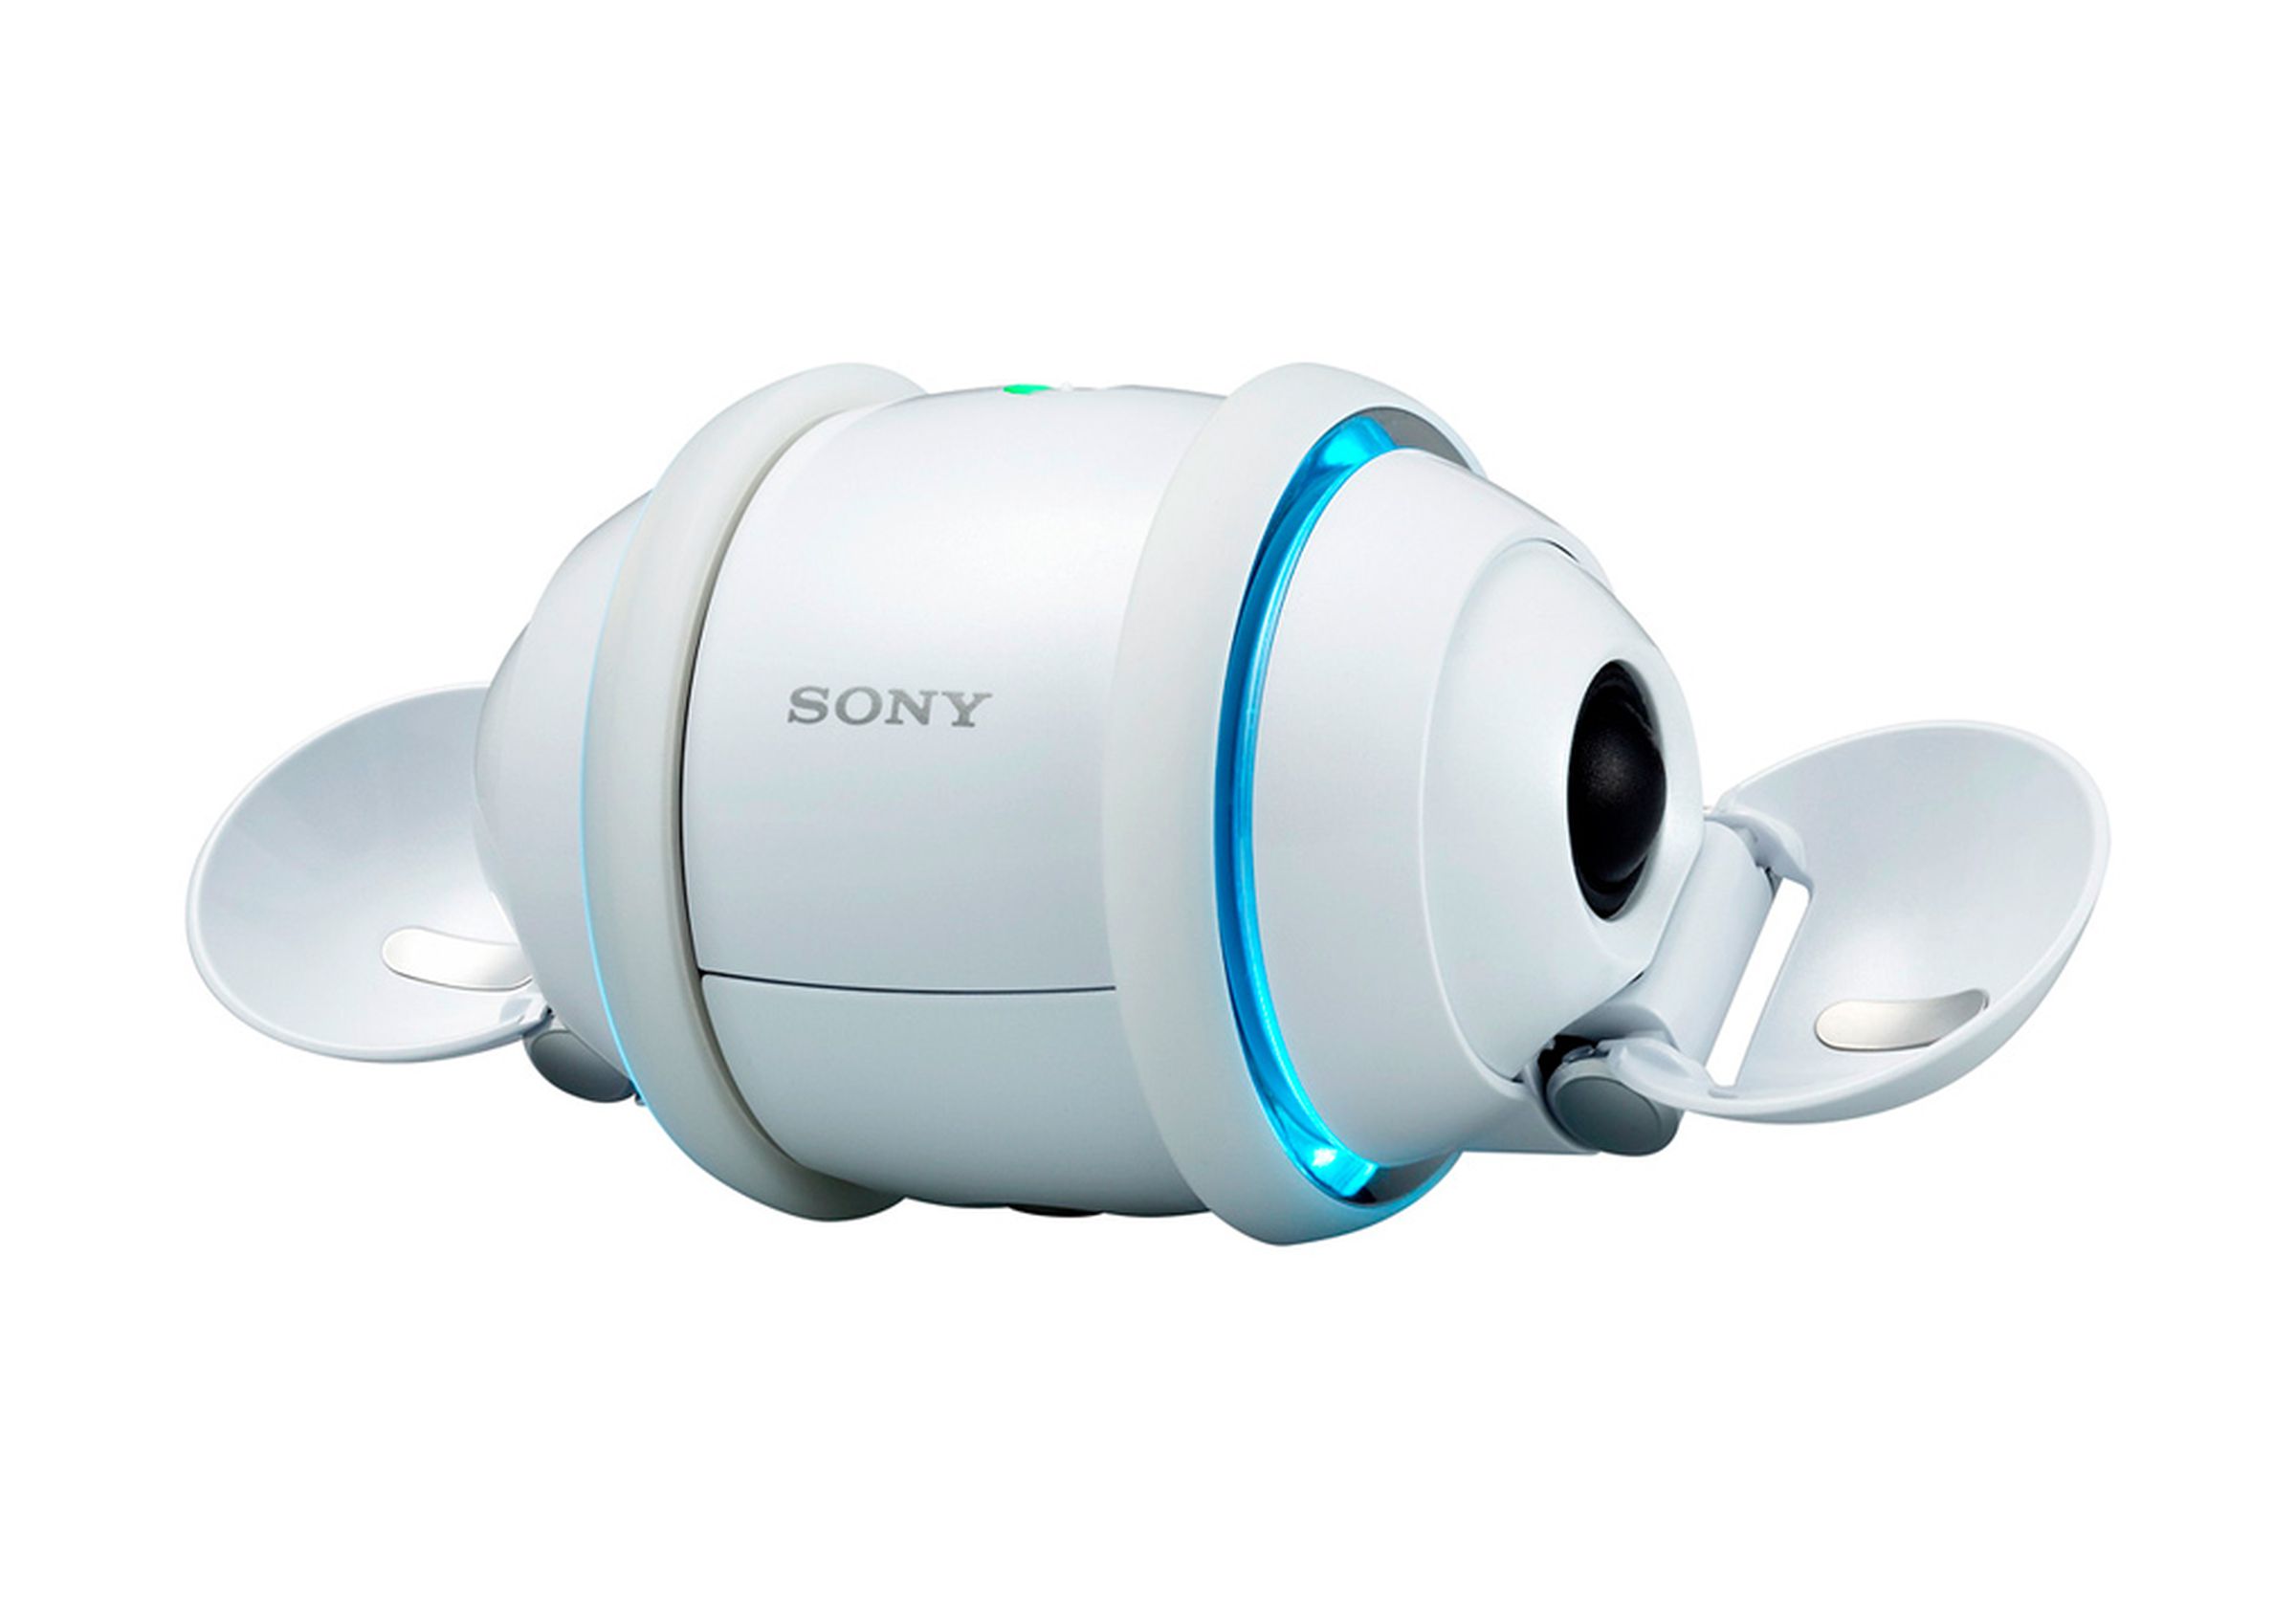 The amazing products of Weird Sony